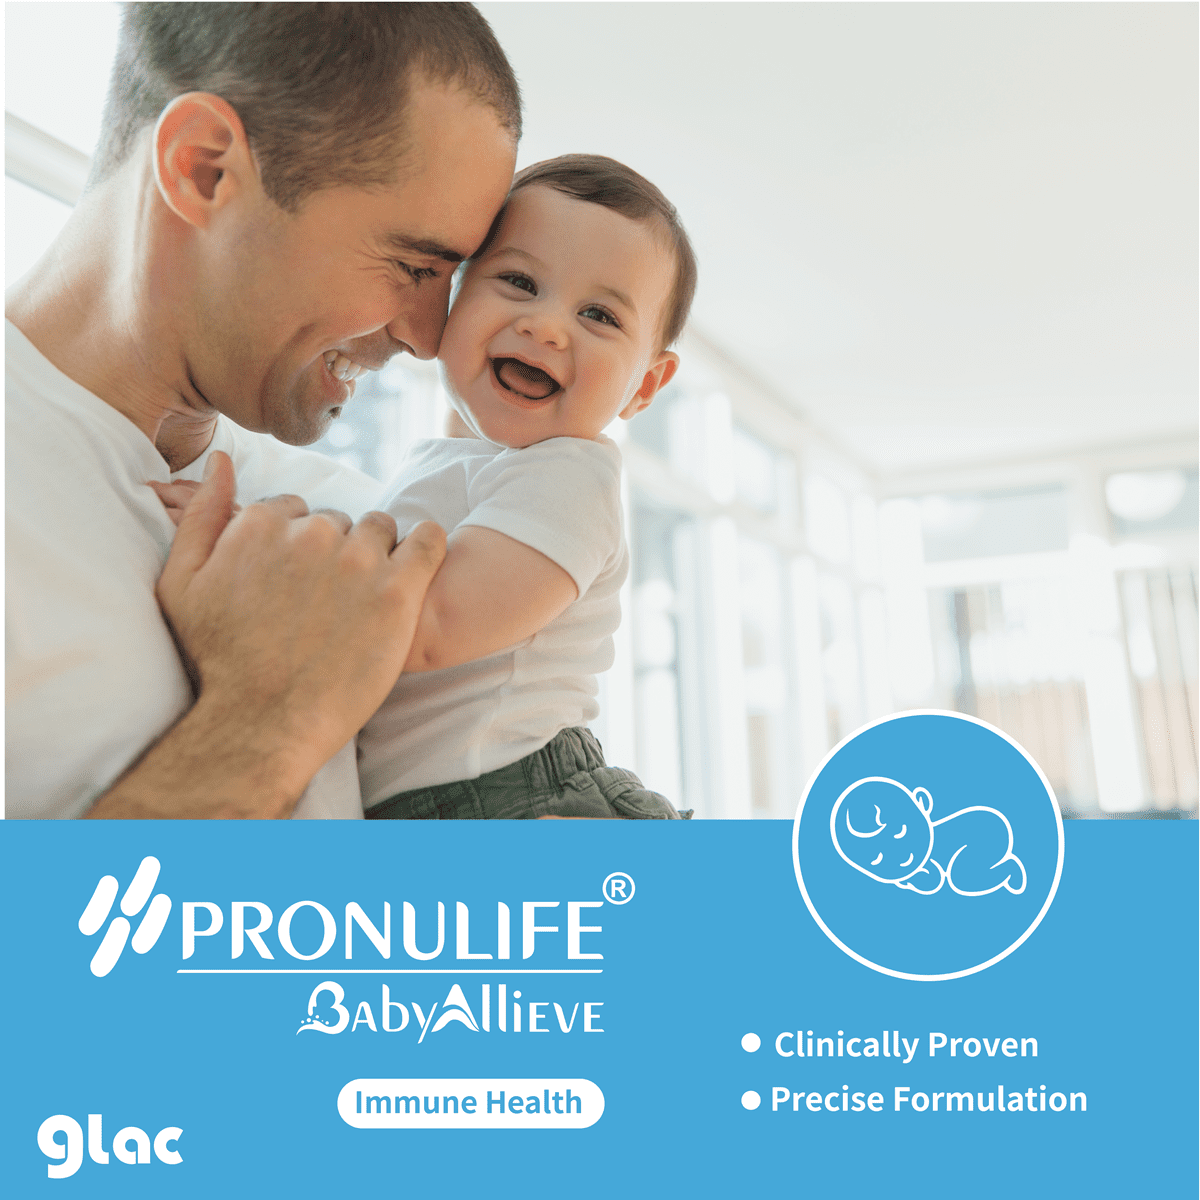 PRONULIFE® BabyAllieve- Clinically proven Probiotic blend for Infant Allergy Prevention